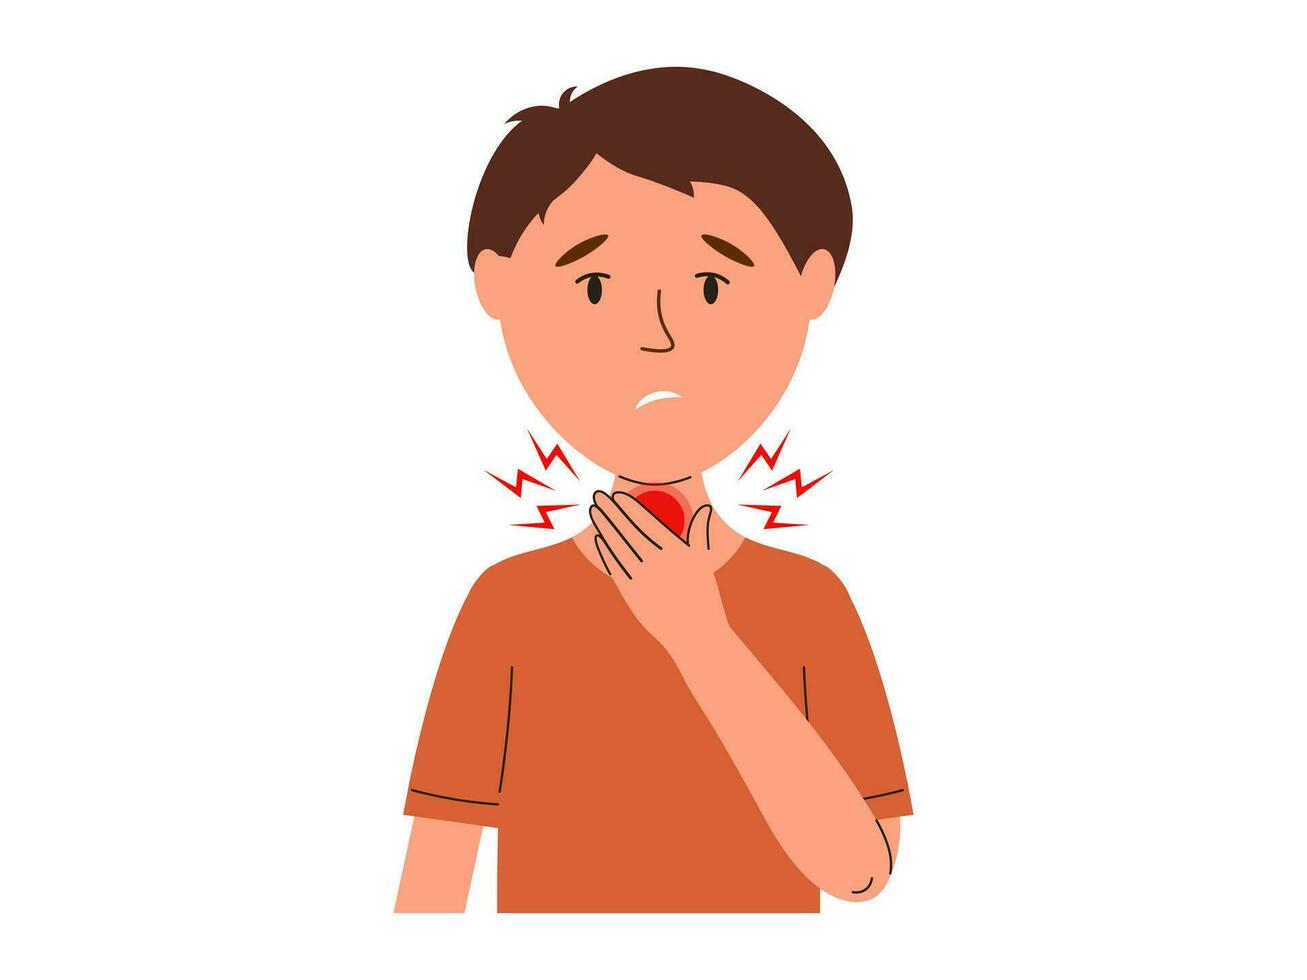 Man has a sore throat. Sick people struggle with health problems, have influenza or covid symptoms. Vector illustration